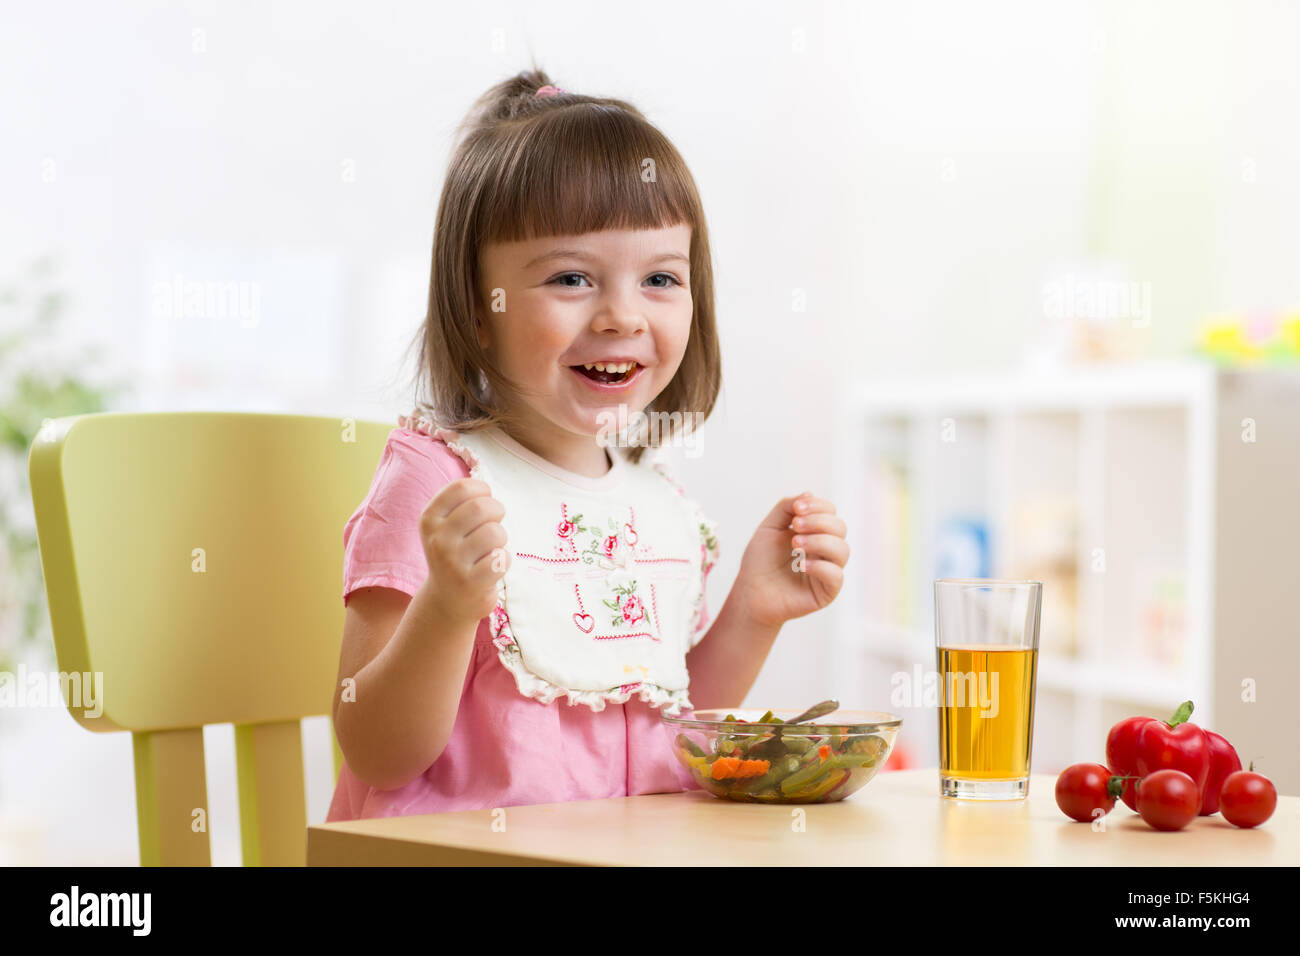 Toddler sitting at table food ready to eat in the nursery. Vegetarian salad and fresh vegetables for child lunch. Stock Photo